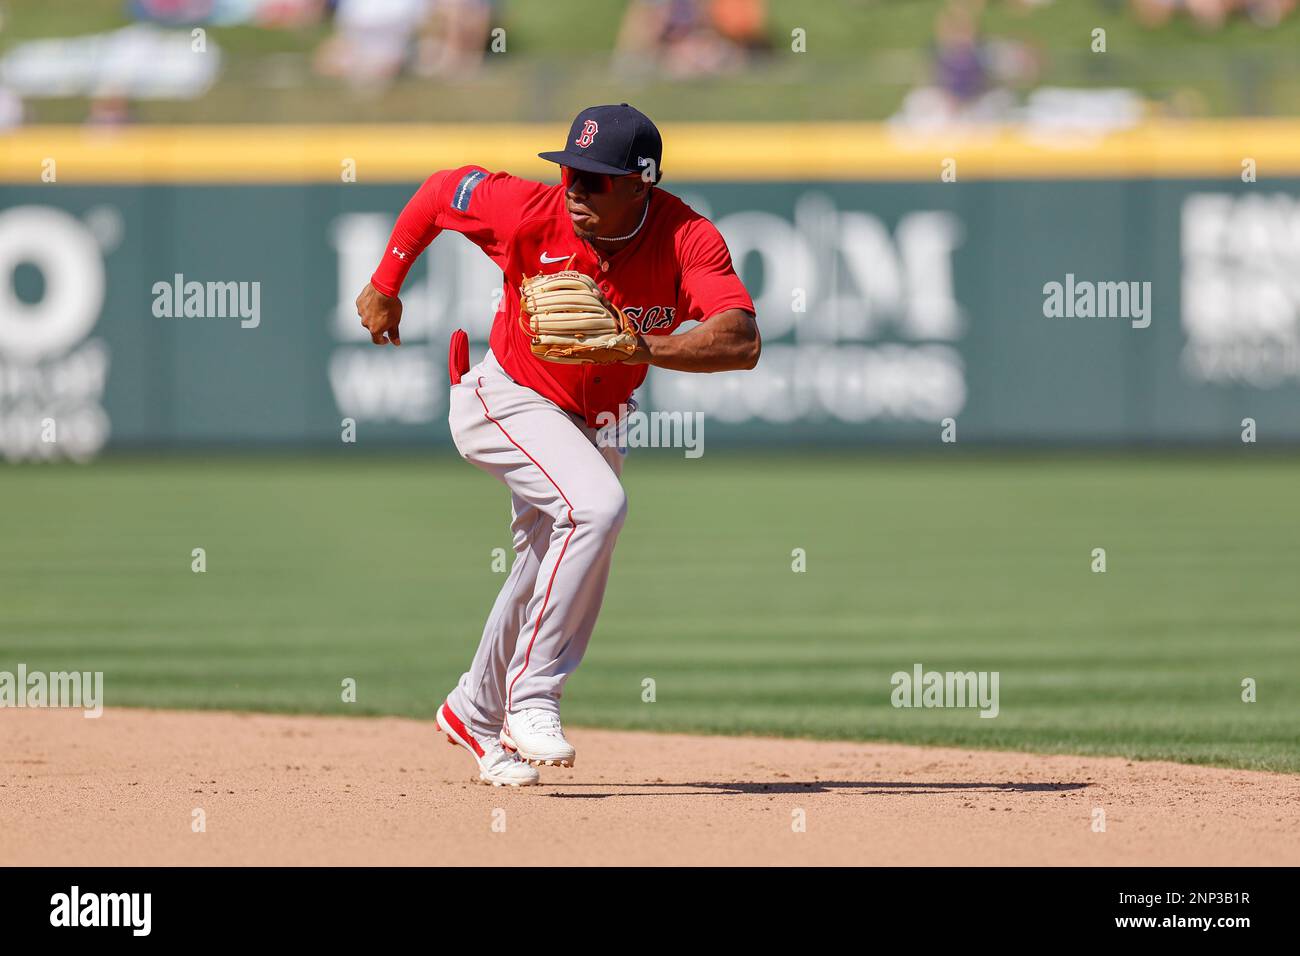 North Port FL USA: Boston Red Sox third baseman Enmanuel Valdez (83) runs to field a hard hit ball and throws to first for the out during an MLB sprin Stock Photo